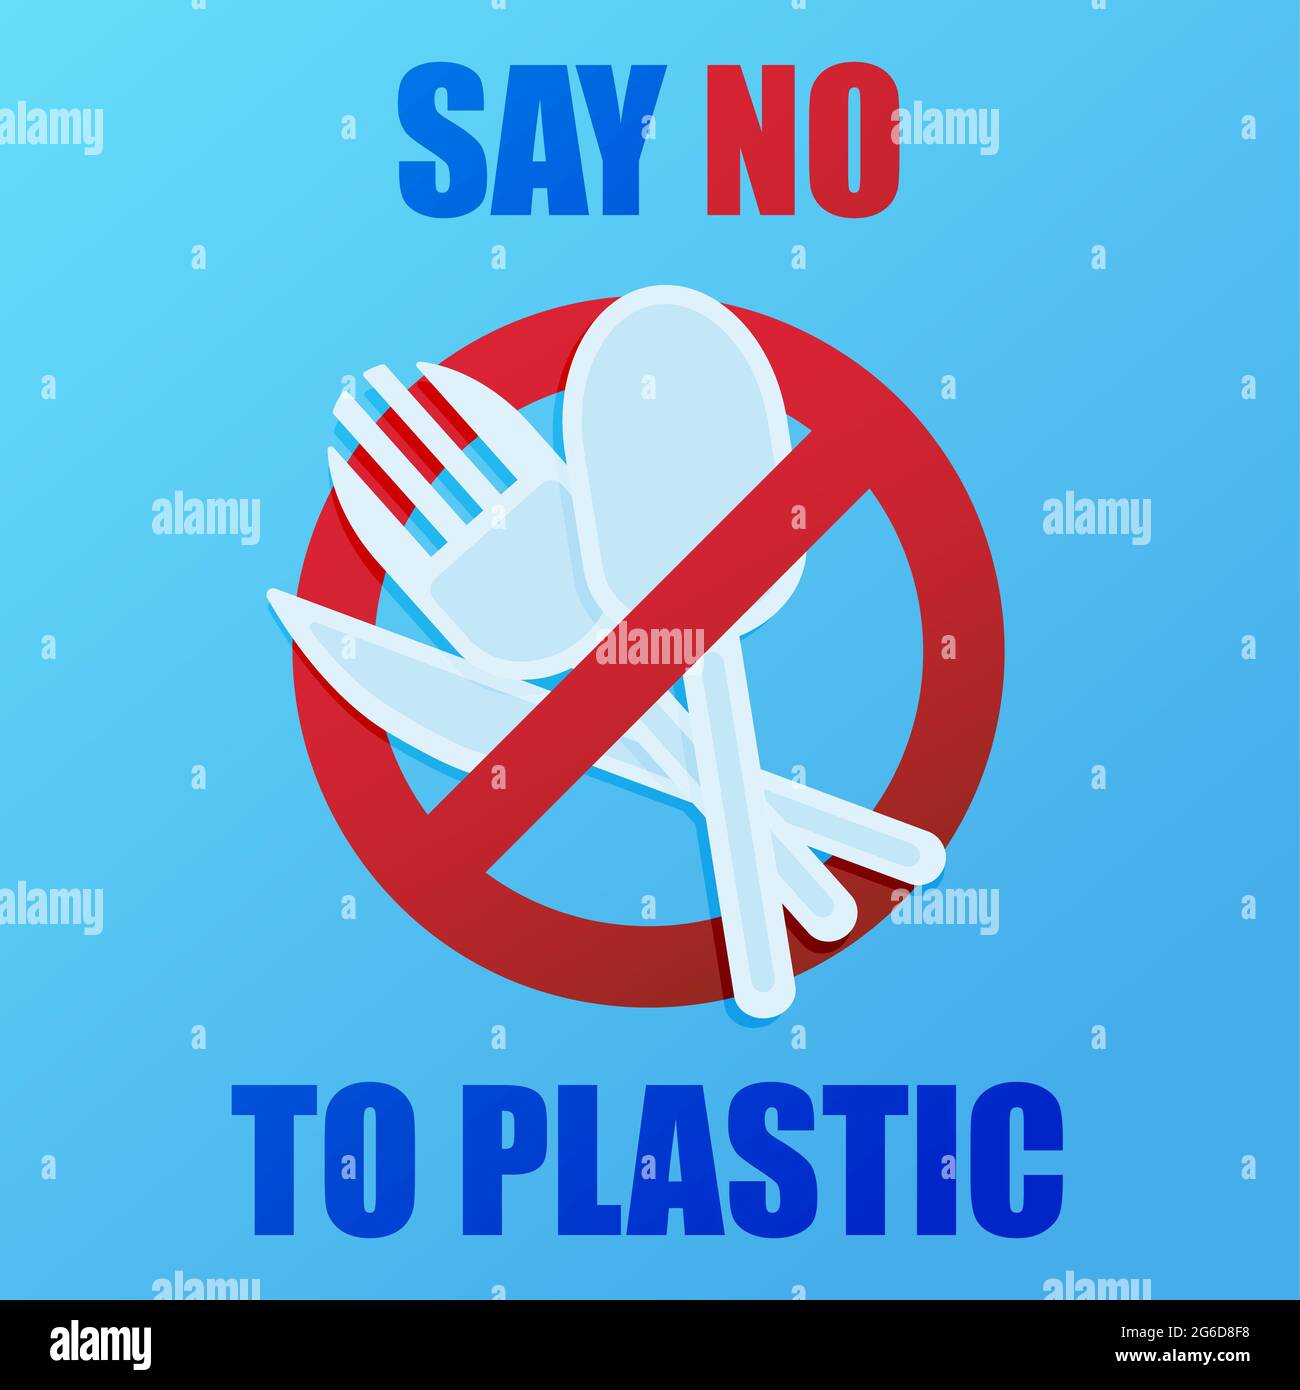 Say no to plastic. Environmental poster with text. Pollution problem concept. Prohibition sign. One use a plastic fork, spoon and knife to eat. Stock Photo